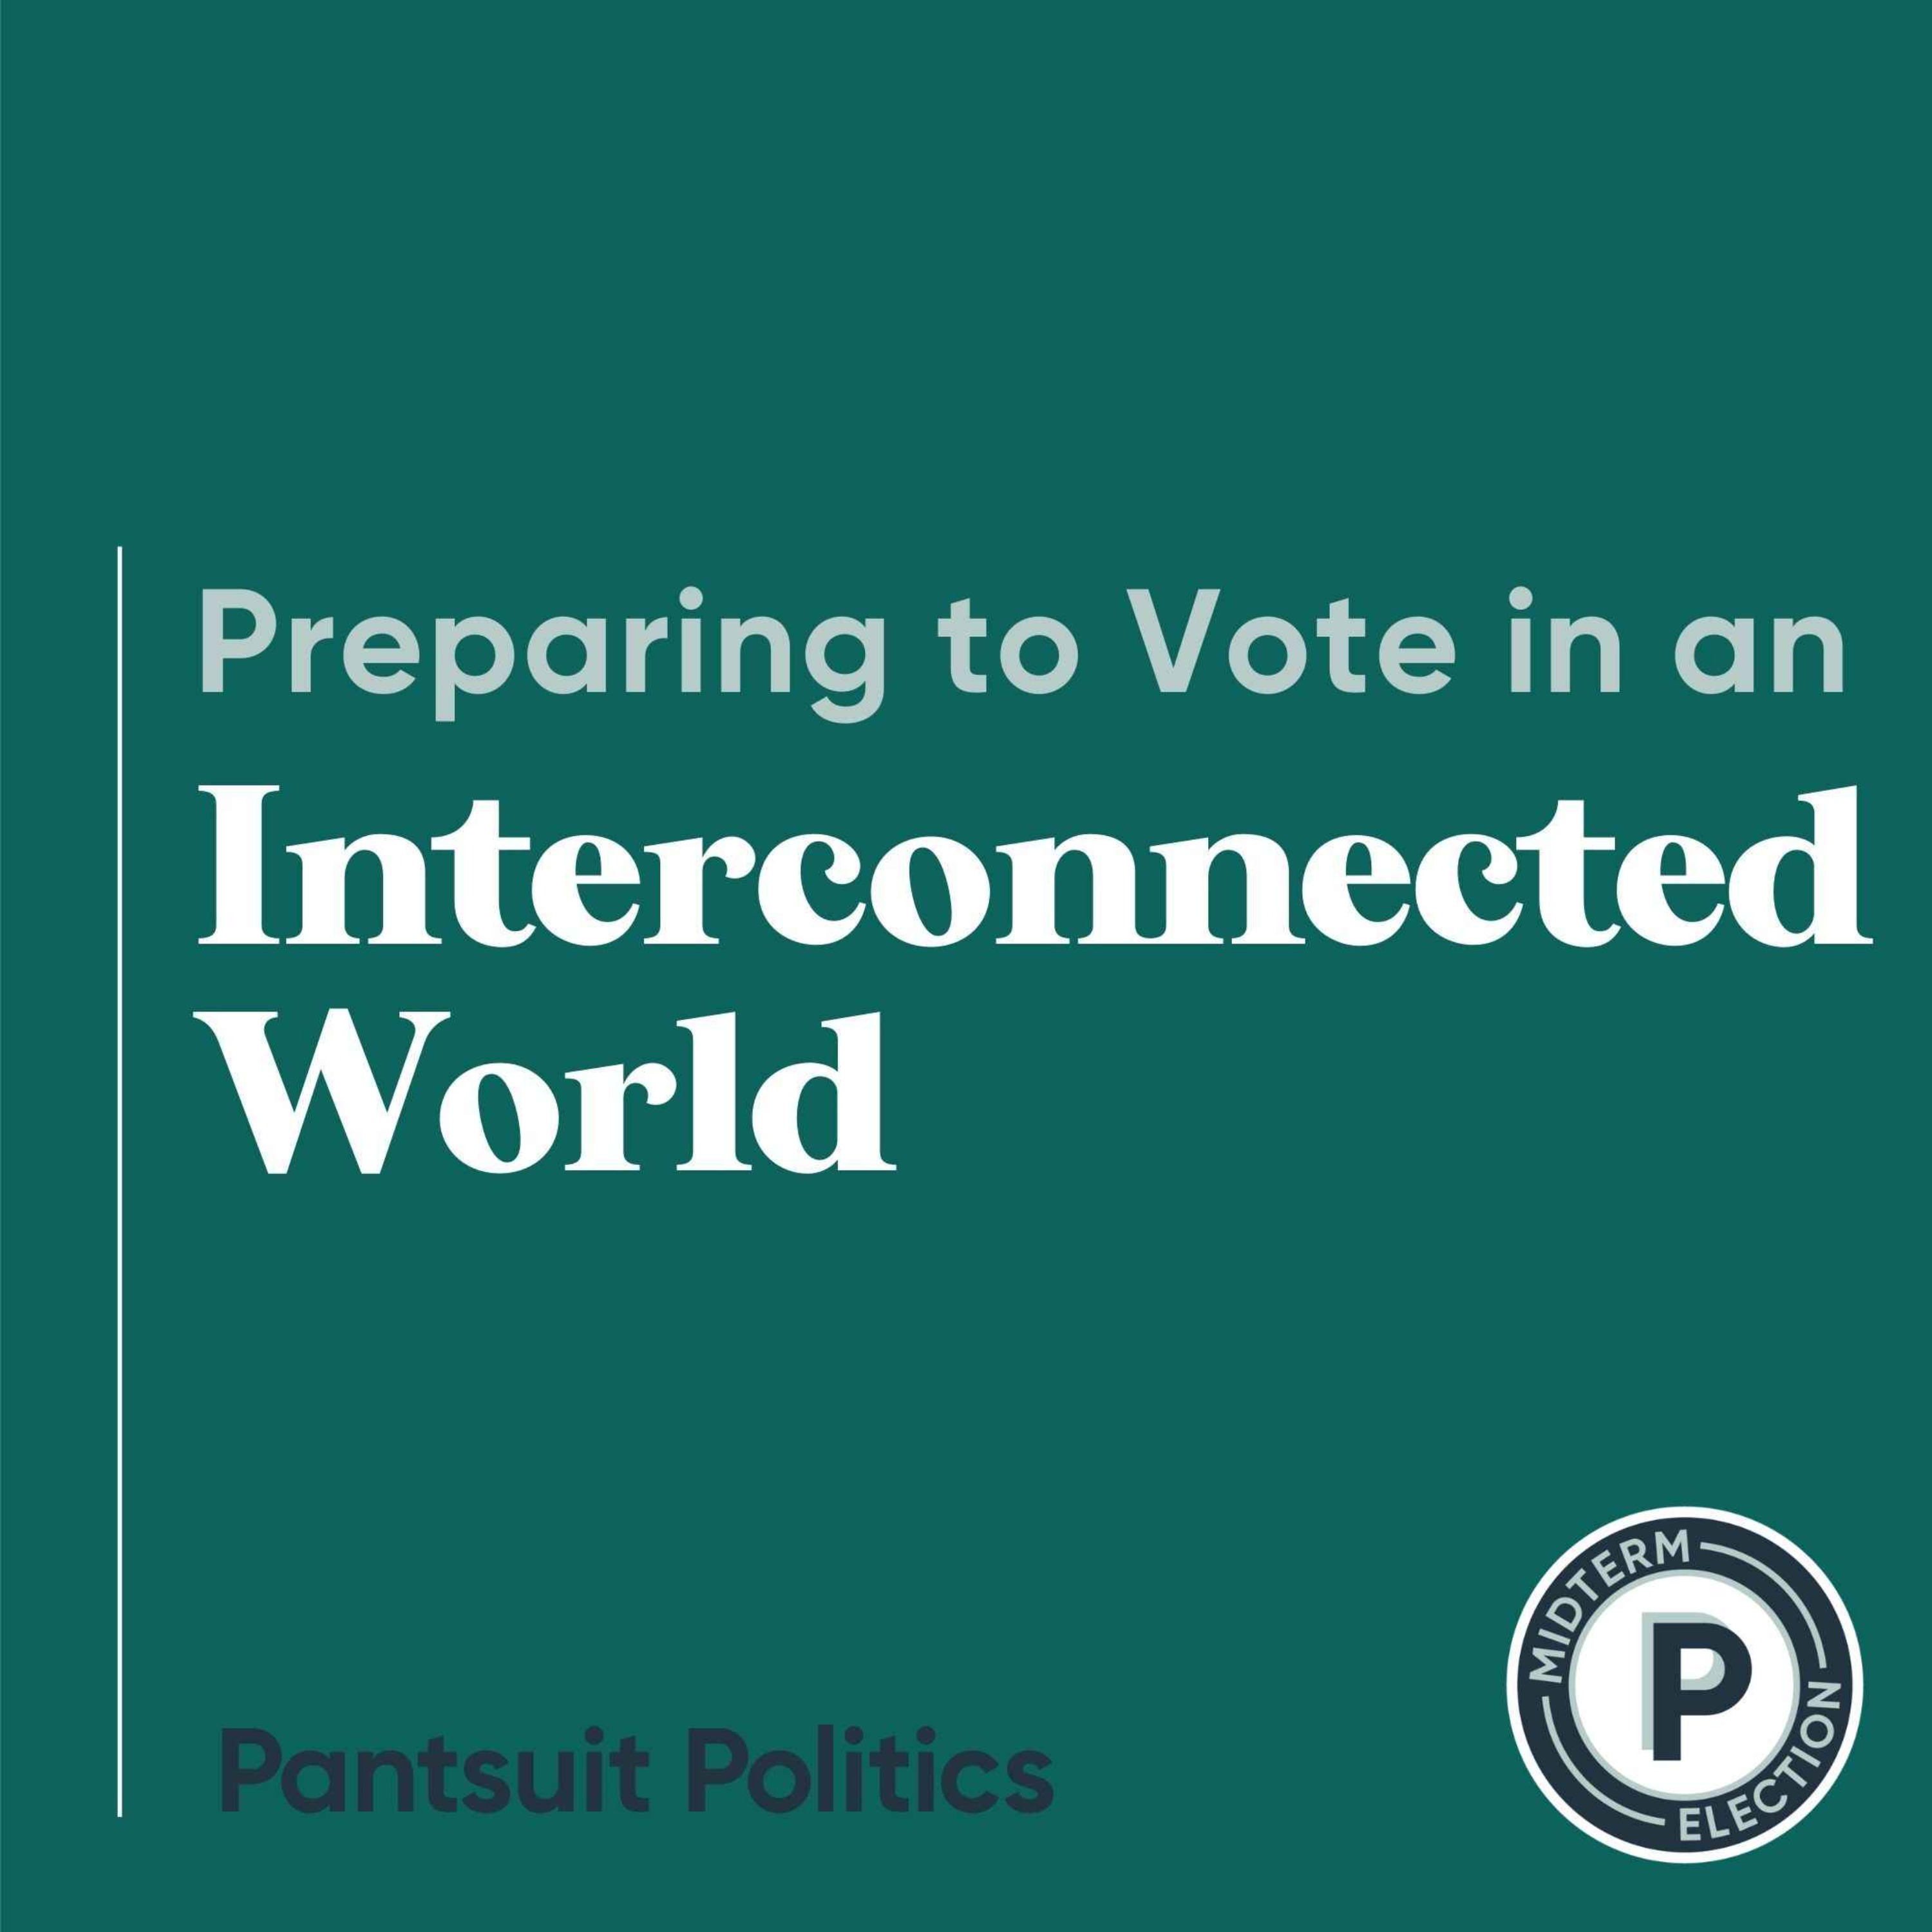 Preparing to Vote in an Interconnected World